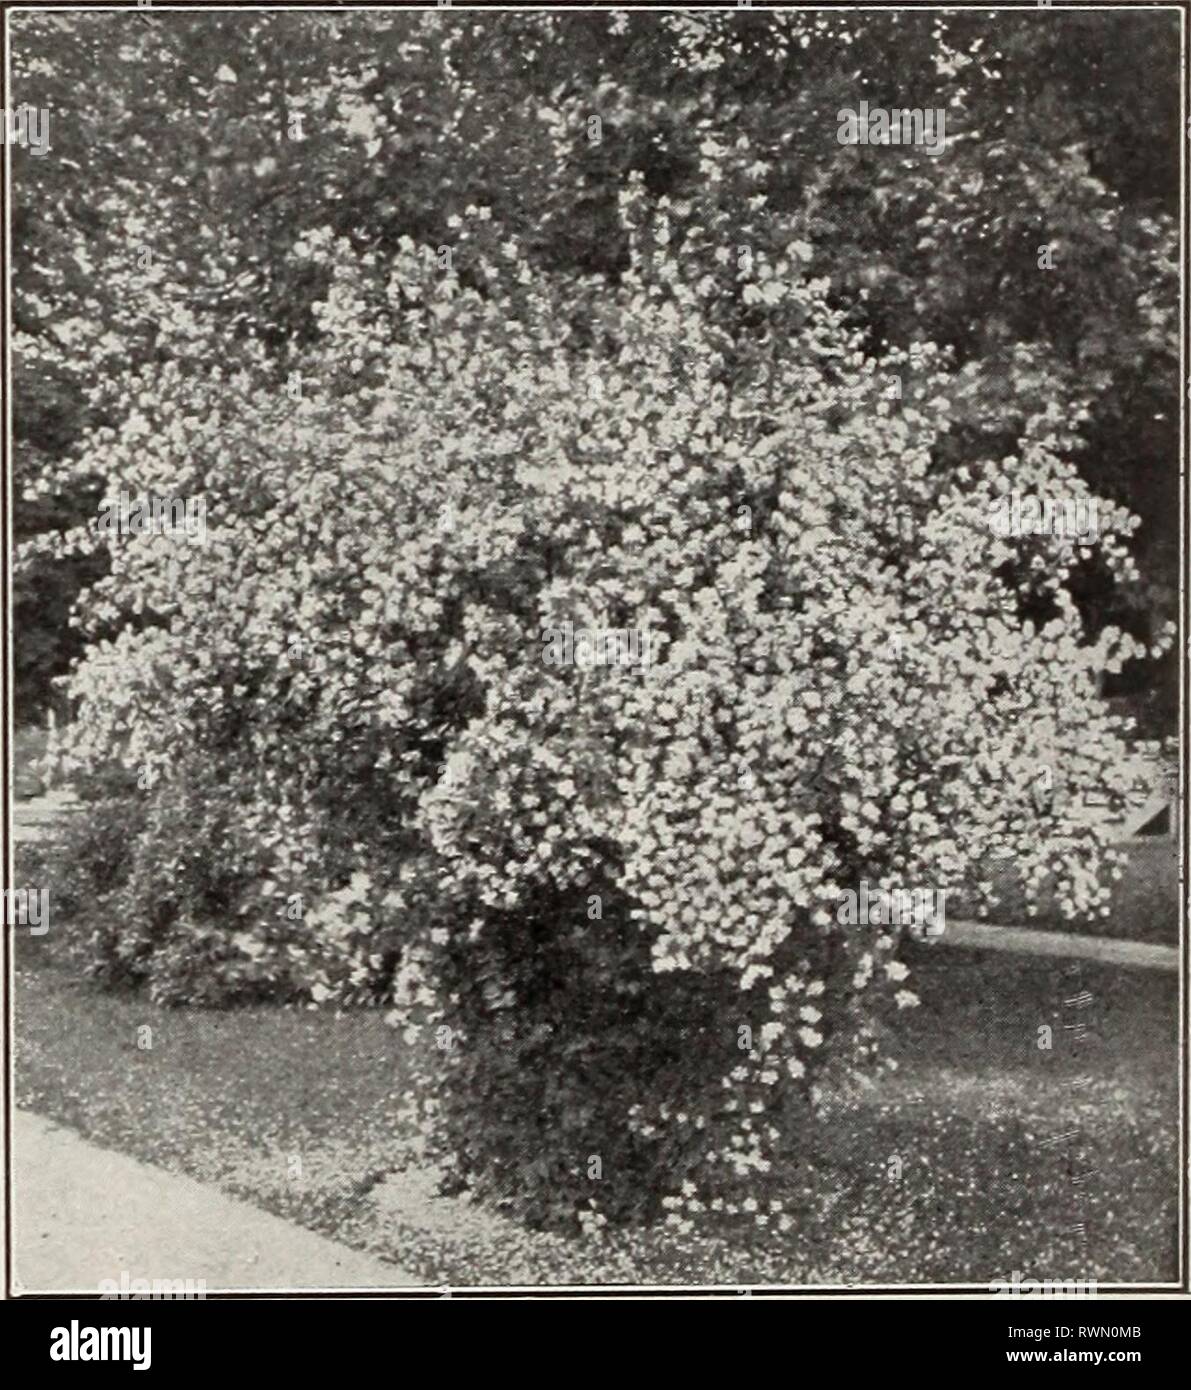 Ellwanger & Barry Mt Hope Ellwanger & Barry Mt Hope Nurseries 1916 ellwangerbarrymt1916moun Year: 1916  LIGUSTRUM-PRIVET-Confinued var. Regelianum. Kegel's Privet. D. A val- uable hardy shrub with handsome, shining foli- age and horizontally spreading branches; desir- able when grown singly as a specimen, or in masses, or for hedges. A prostrate form of Ibota. 18 to 24 in., 35c each; 10 for $2.50; 100 for $20.00. L. ovalifolium. California Privet. D. A vig- orous, hardy variety, of fine habit and foliage; valuable for hedges. 2 to 3 ft., 35c each; 10 for $1.50; 100 for $5.00. See also Hedge Pl Stock Photo